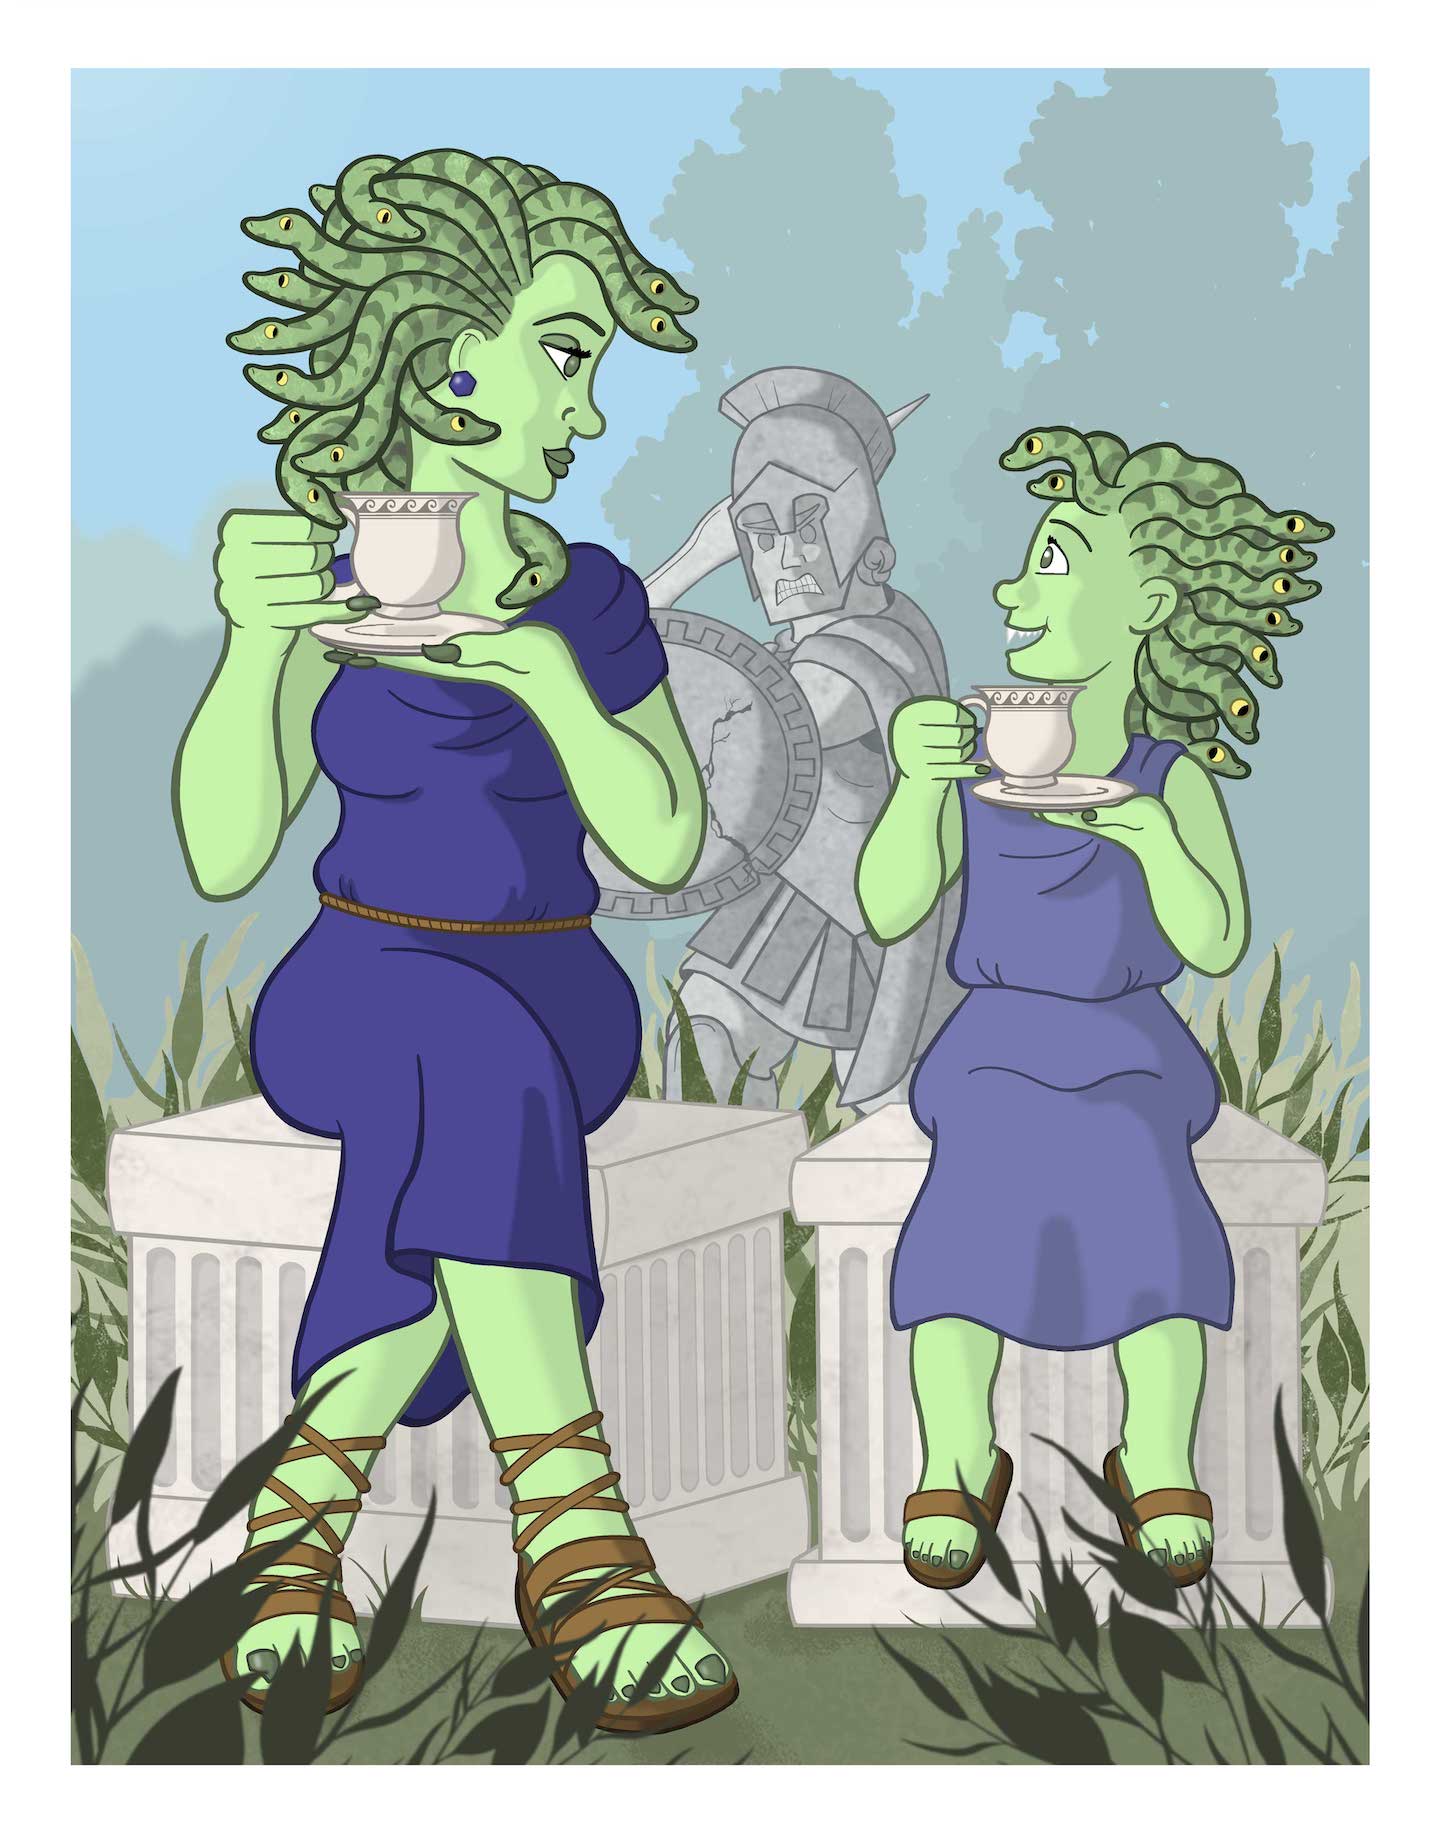 Illustration of Medusa enjoying a cup of tea with her young daughter while a stone warrior makes an ineffective angry pose in the background